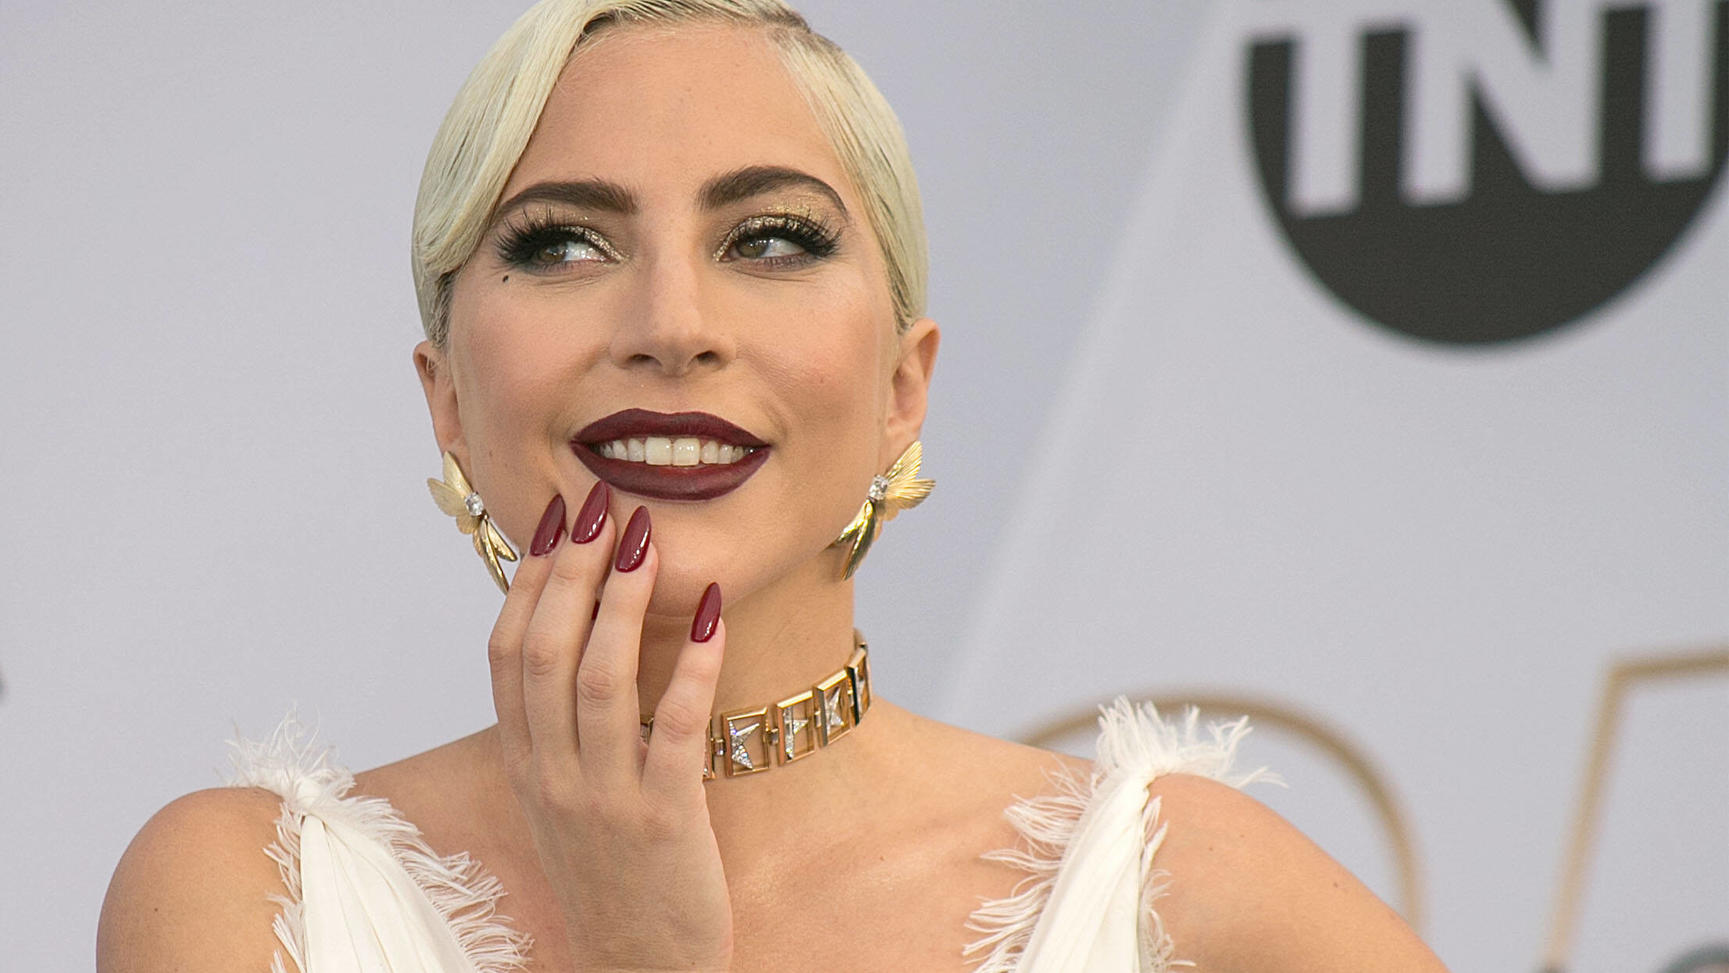  February 26, 2021, Los Angeles, California, USA: Lady Gaga offers $500,000 for return of dogs after thief steals them and shoots dog walker identified as Ryan Fischer. FILE PHOTO: Lady Gaga at the red carpet of the 25th Annual Screen Actors Guild Aw